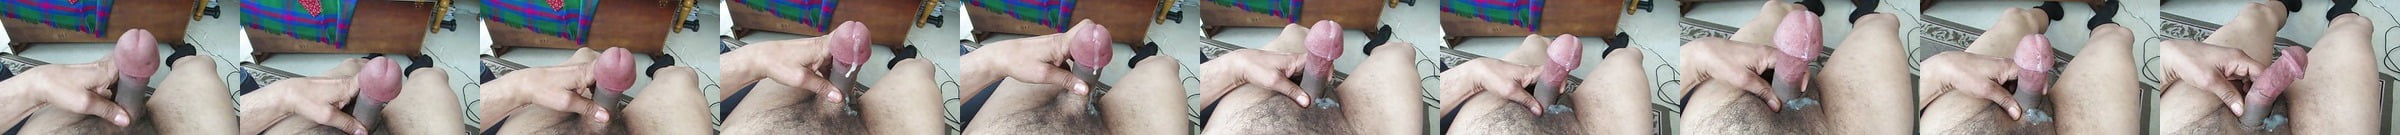 A Tour Of My Soft Cock And Saggy Balls Free Gay Hd Porn 05 Xhamster